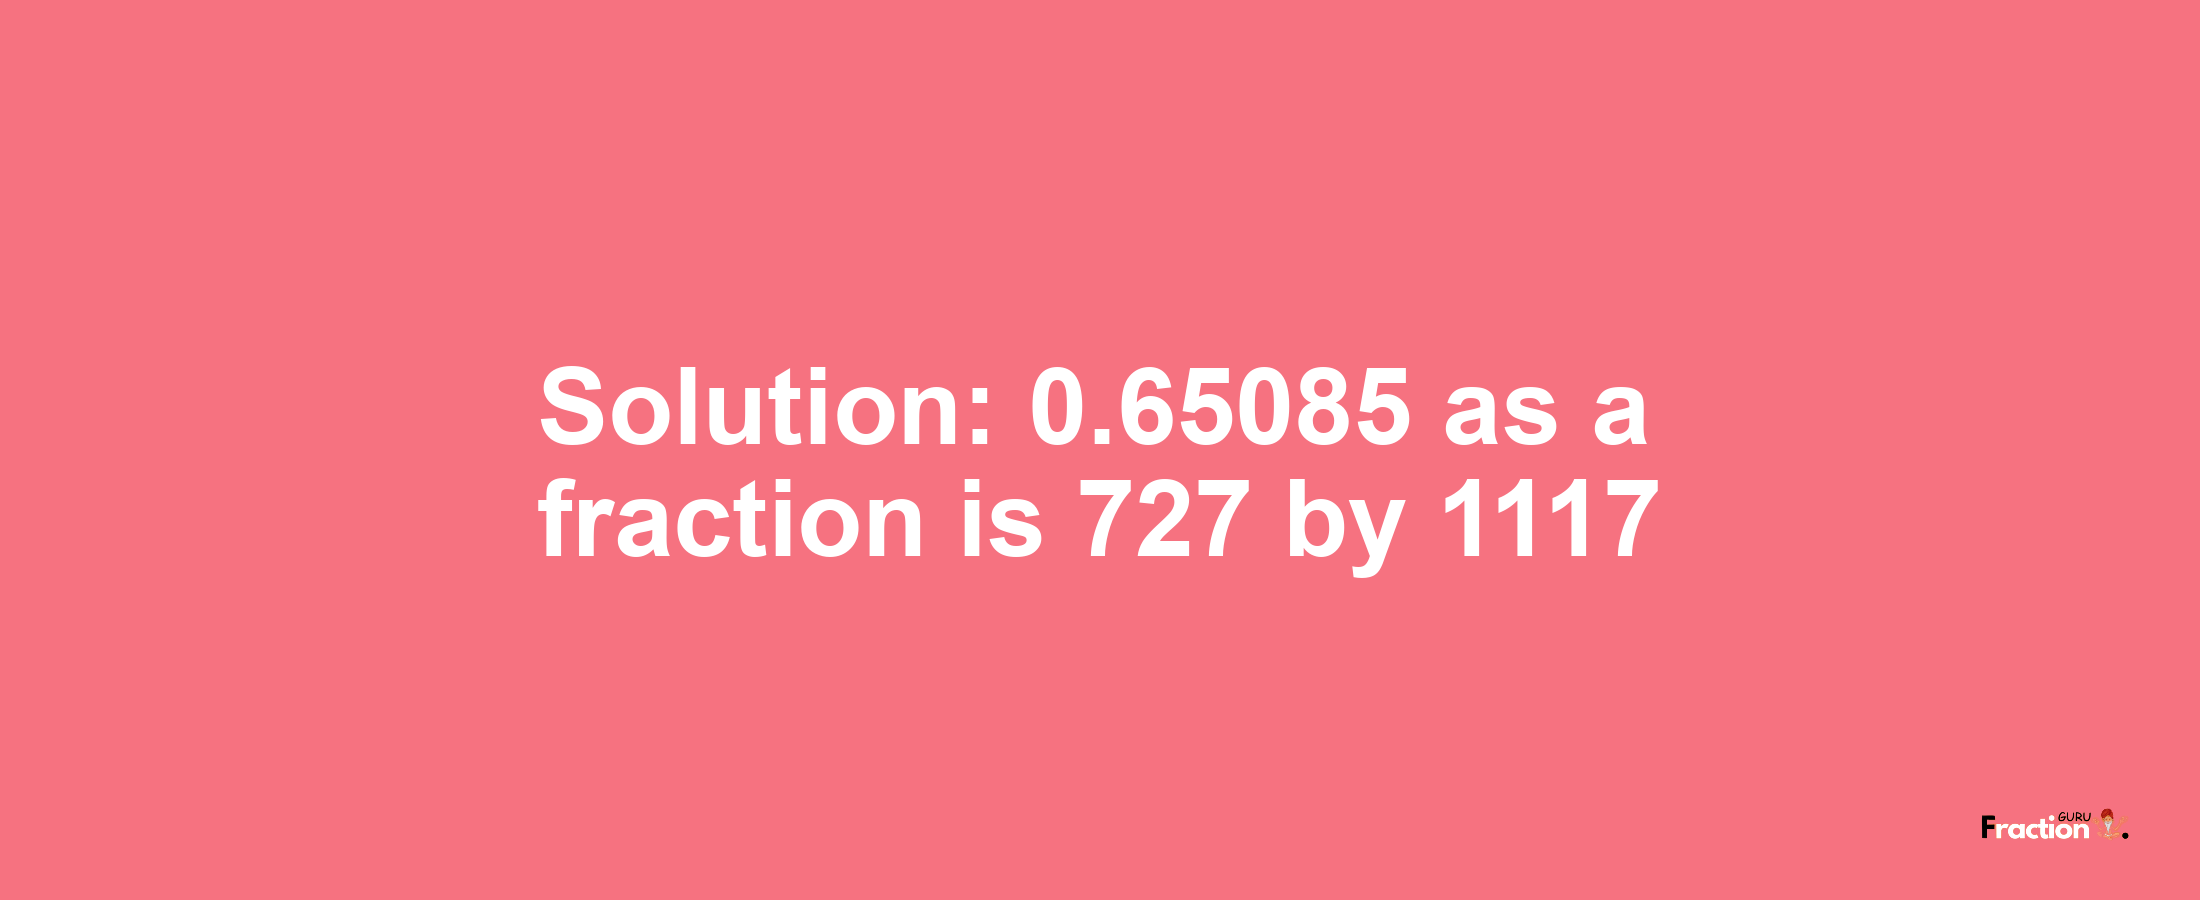 Solution:0.65085 as a fraction is 727/1117